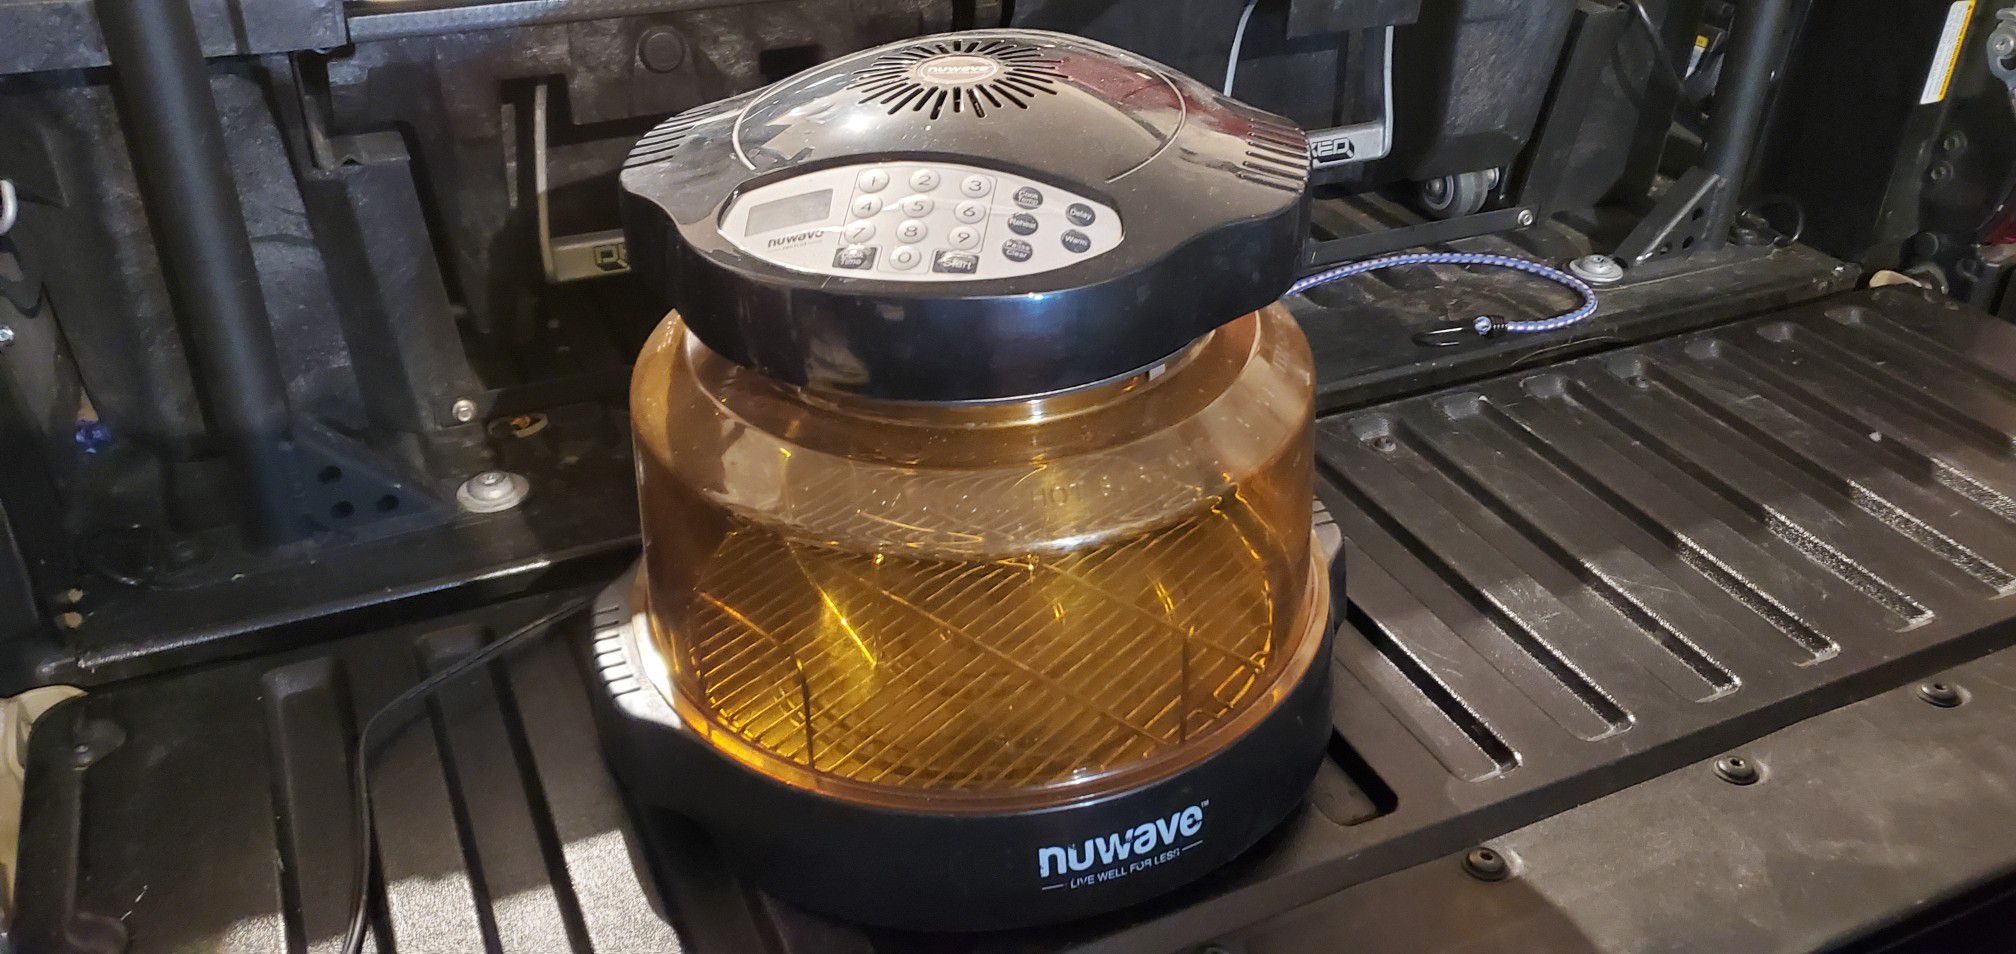 NuWave Airfryer/Convection Oven